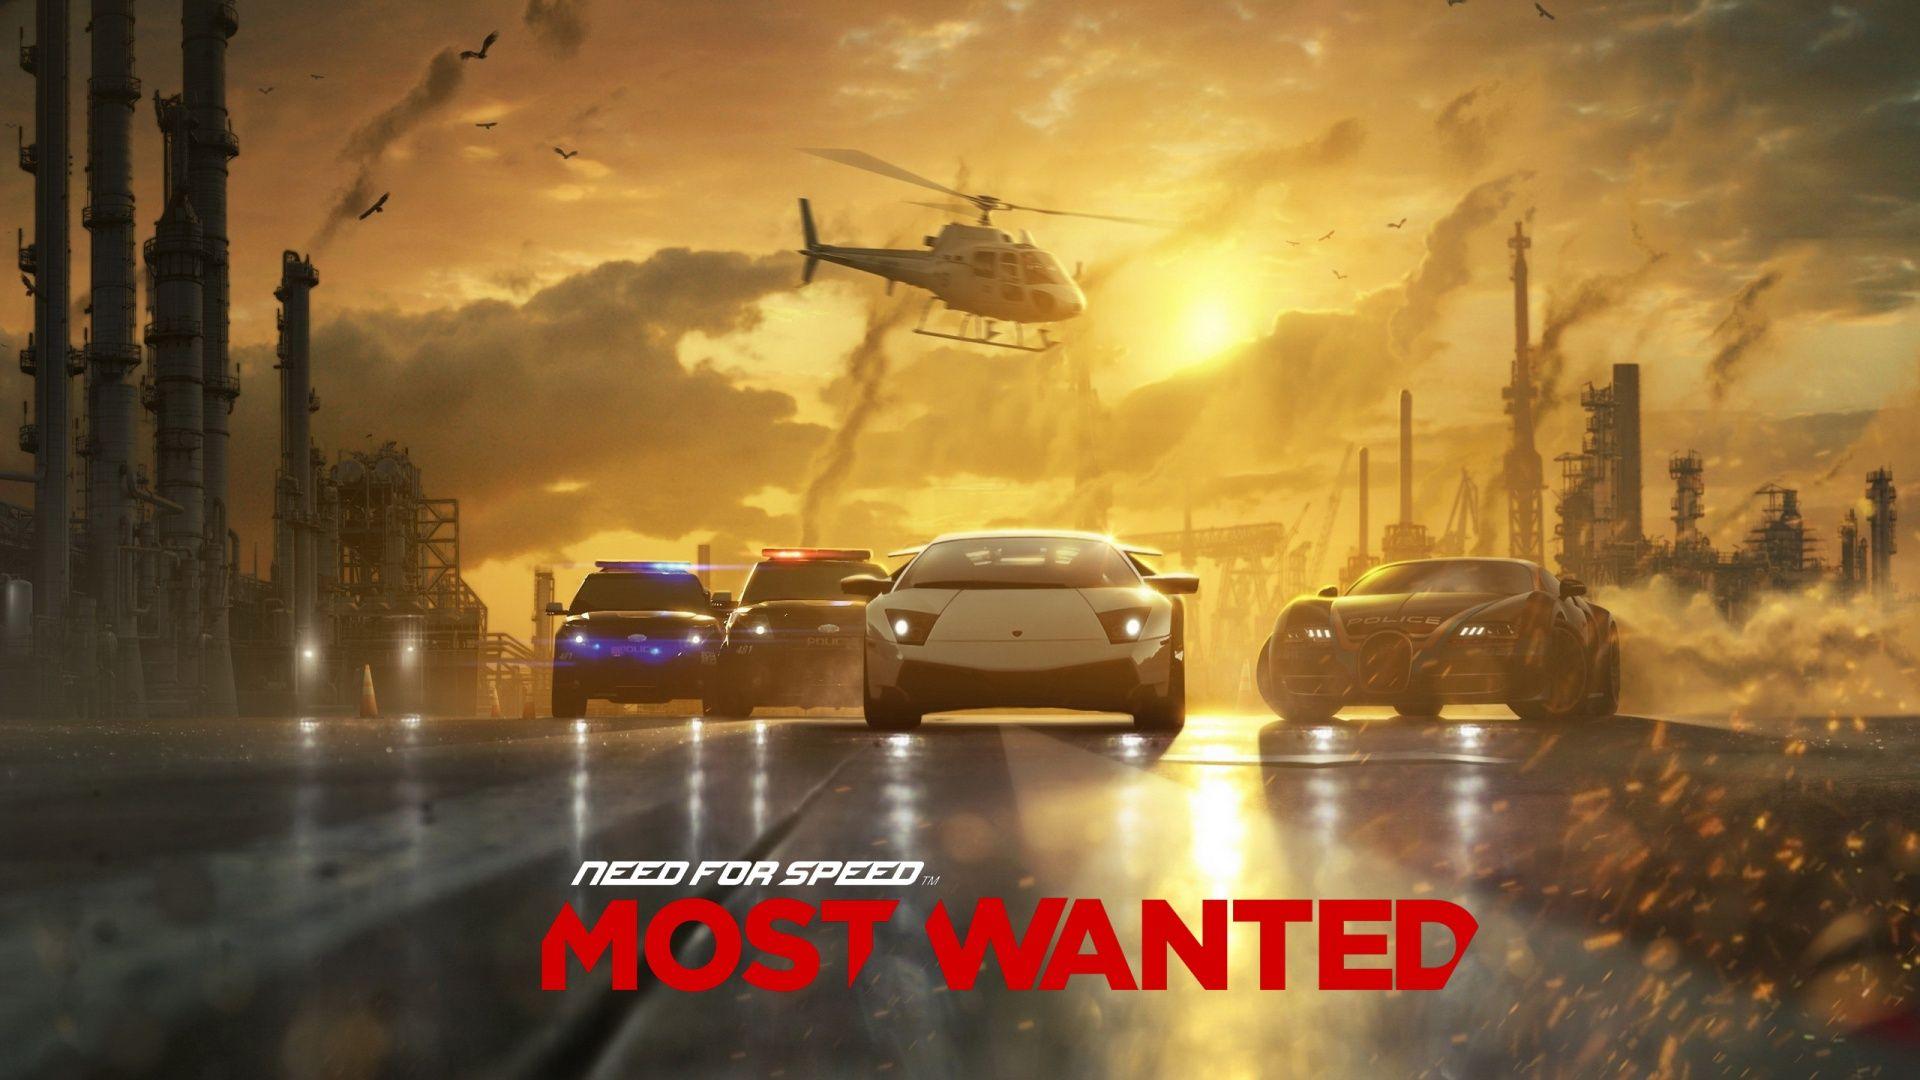 Need for Speed Most Wanted HD Wallpaper. High Definition Wallpaper